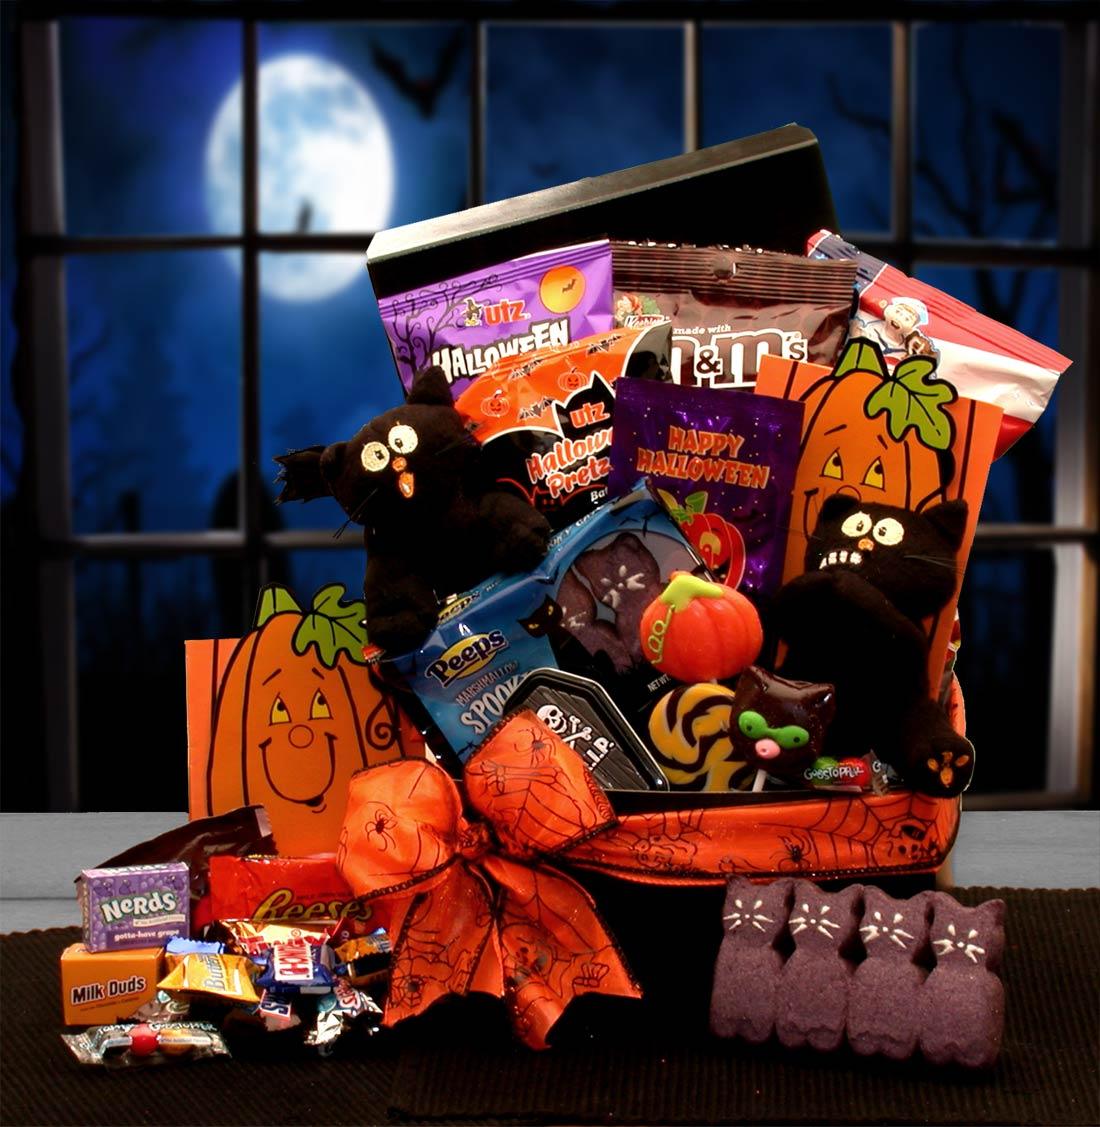 Halloween candy care package, Halloween gift basket, Halloween baskets, Childs Halloween gift, Childs Halloween basket, kids Halloween basket, kids Halloween gift